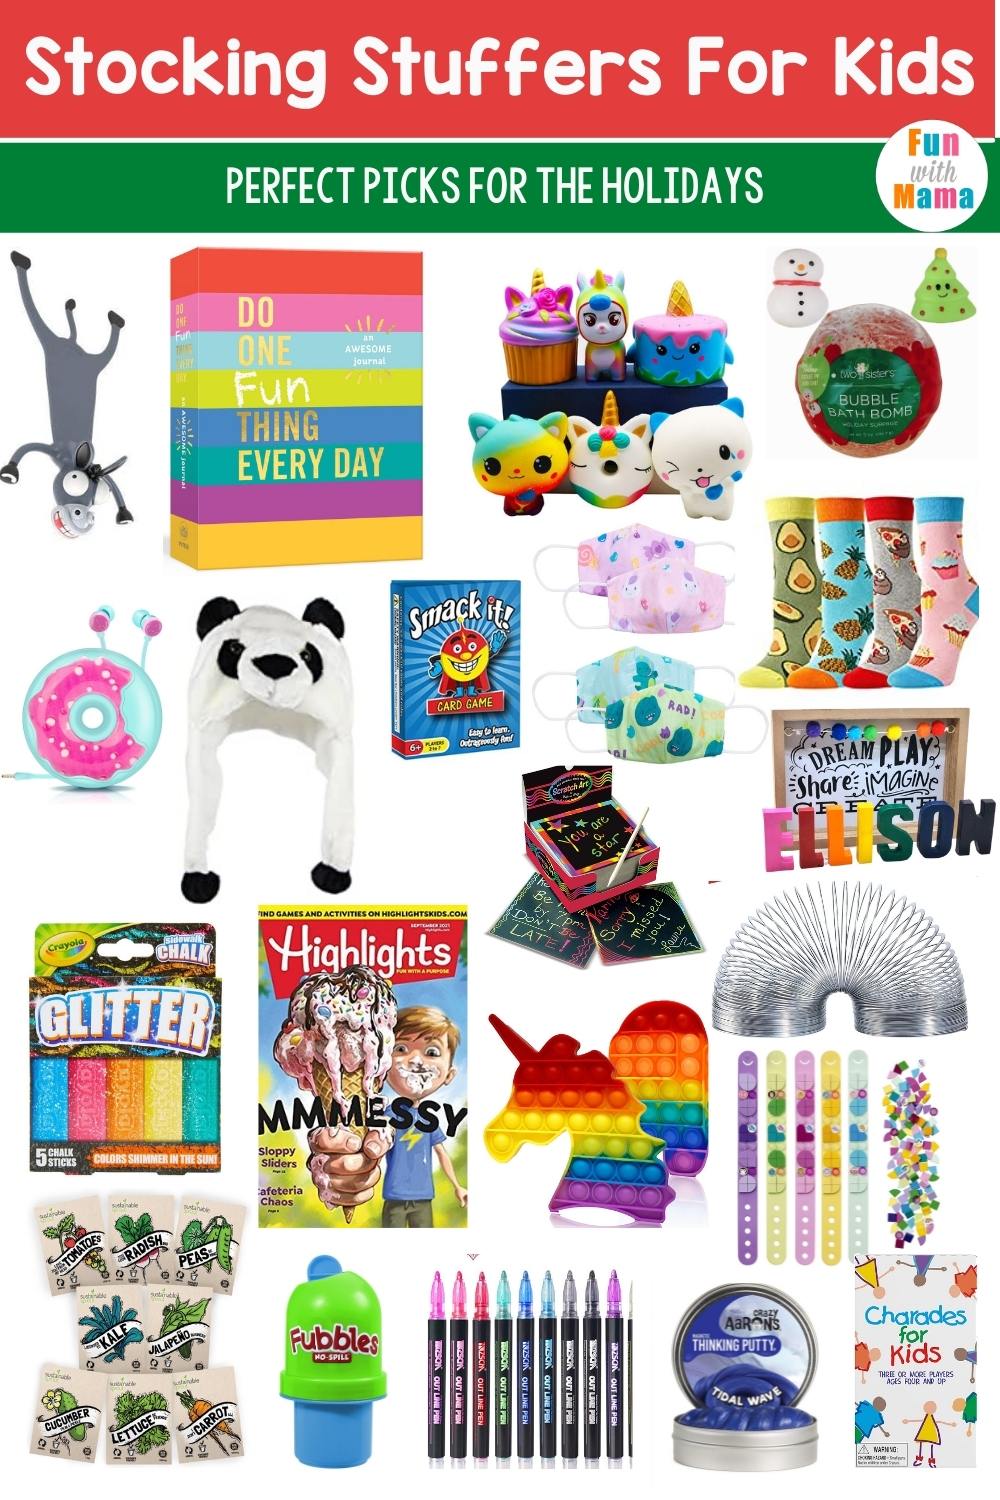 stocking stuffers for kids - gift ideas